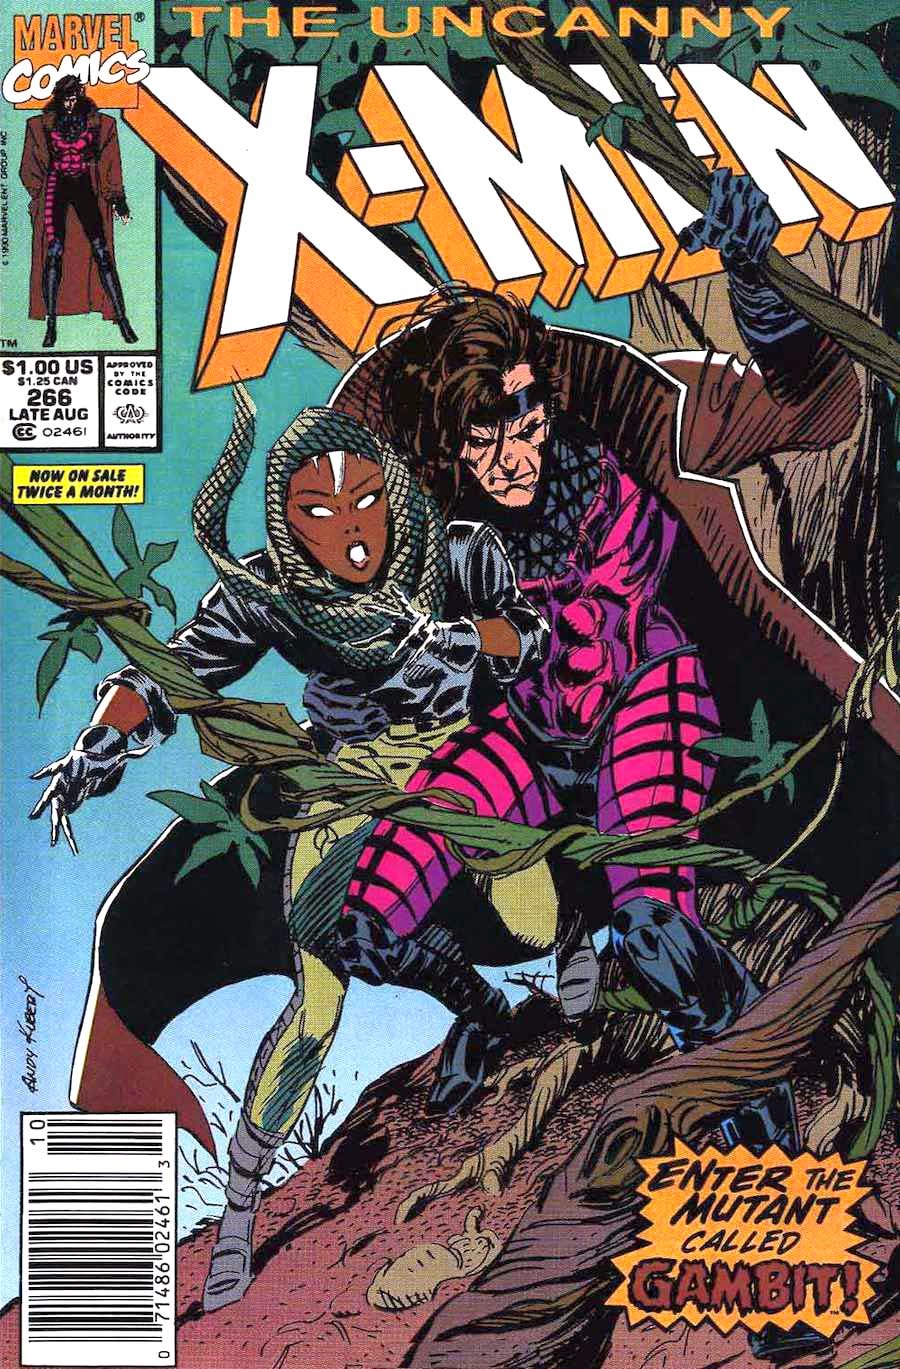 X-men #266 marvel 1990s copper age comic book cover - 1st Gambit full appearance